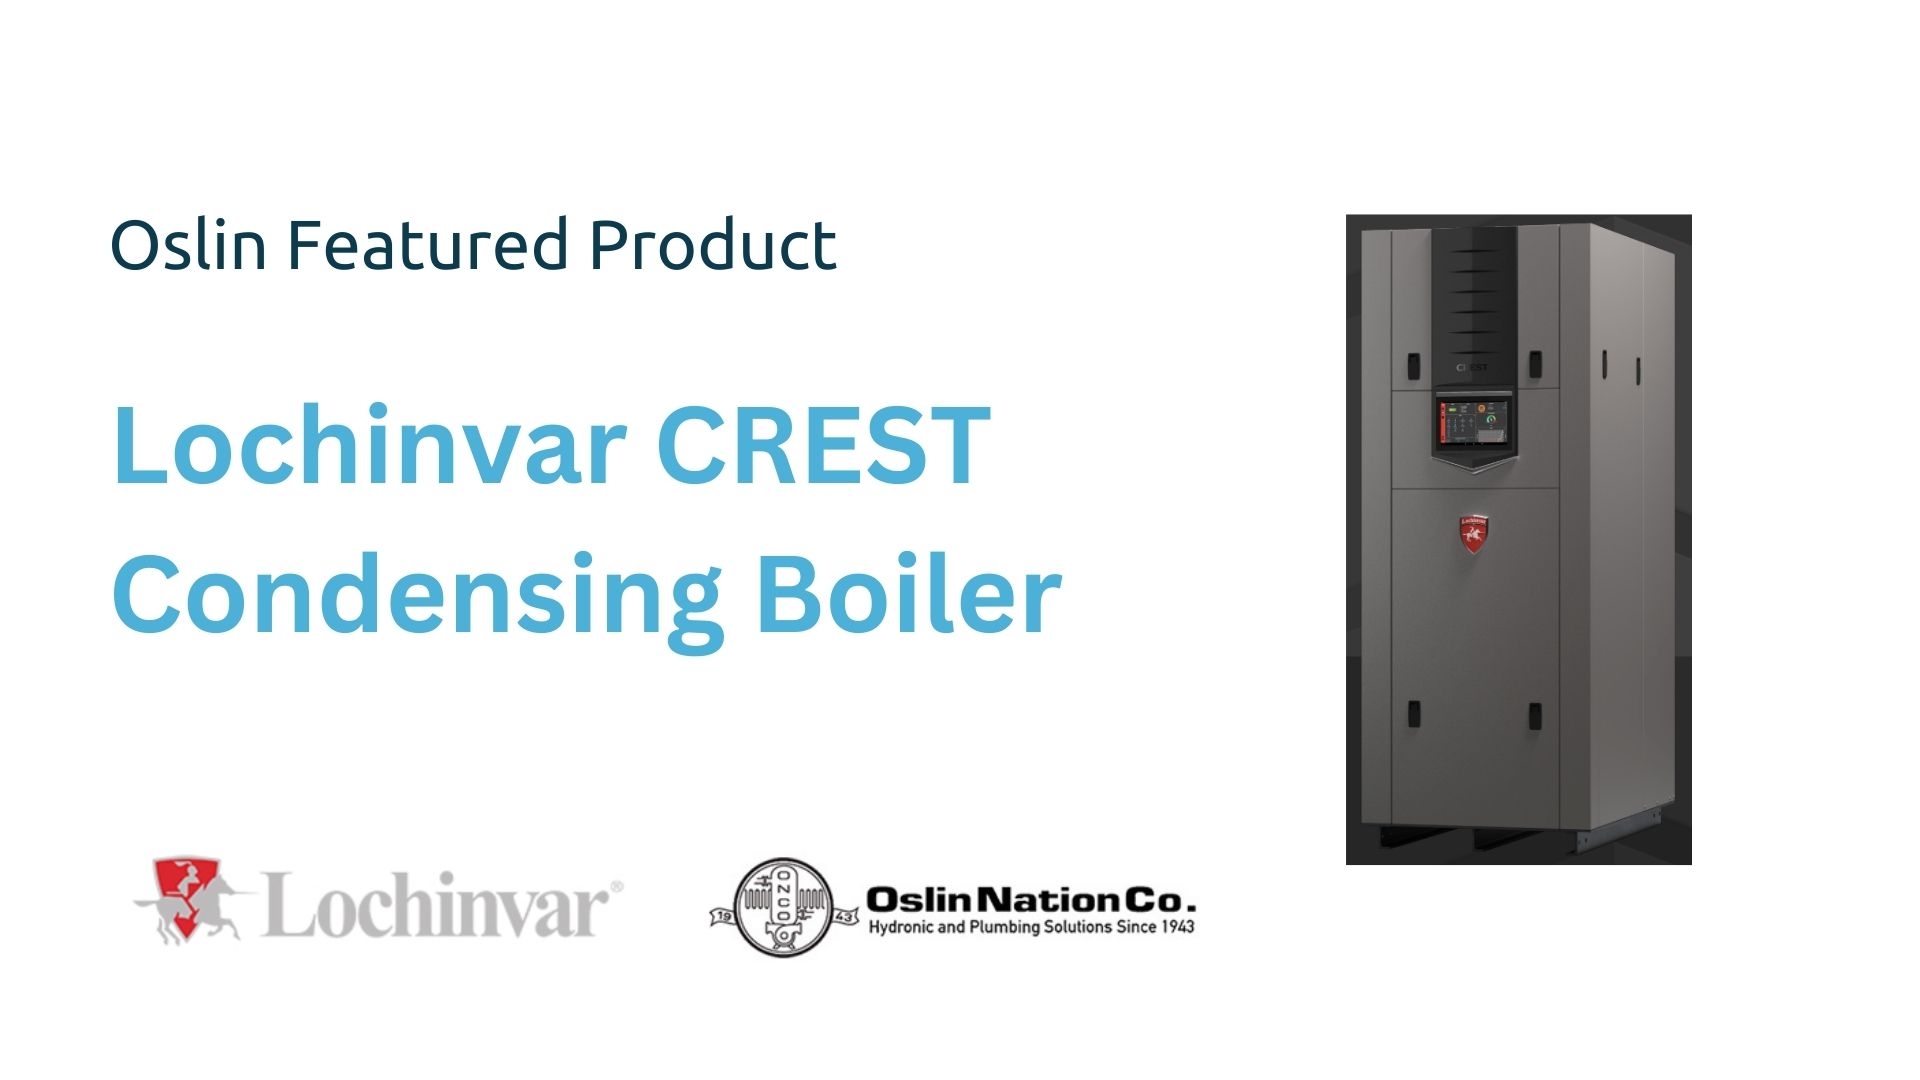 The Oslin Featured Product is Lochinvar CREST Condensing Boiler, with a photo of the boiler, and logos for both Lochinvar and Oslin Nation Co.